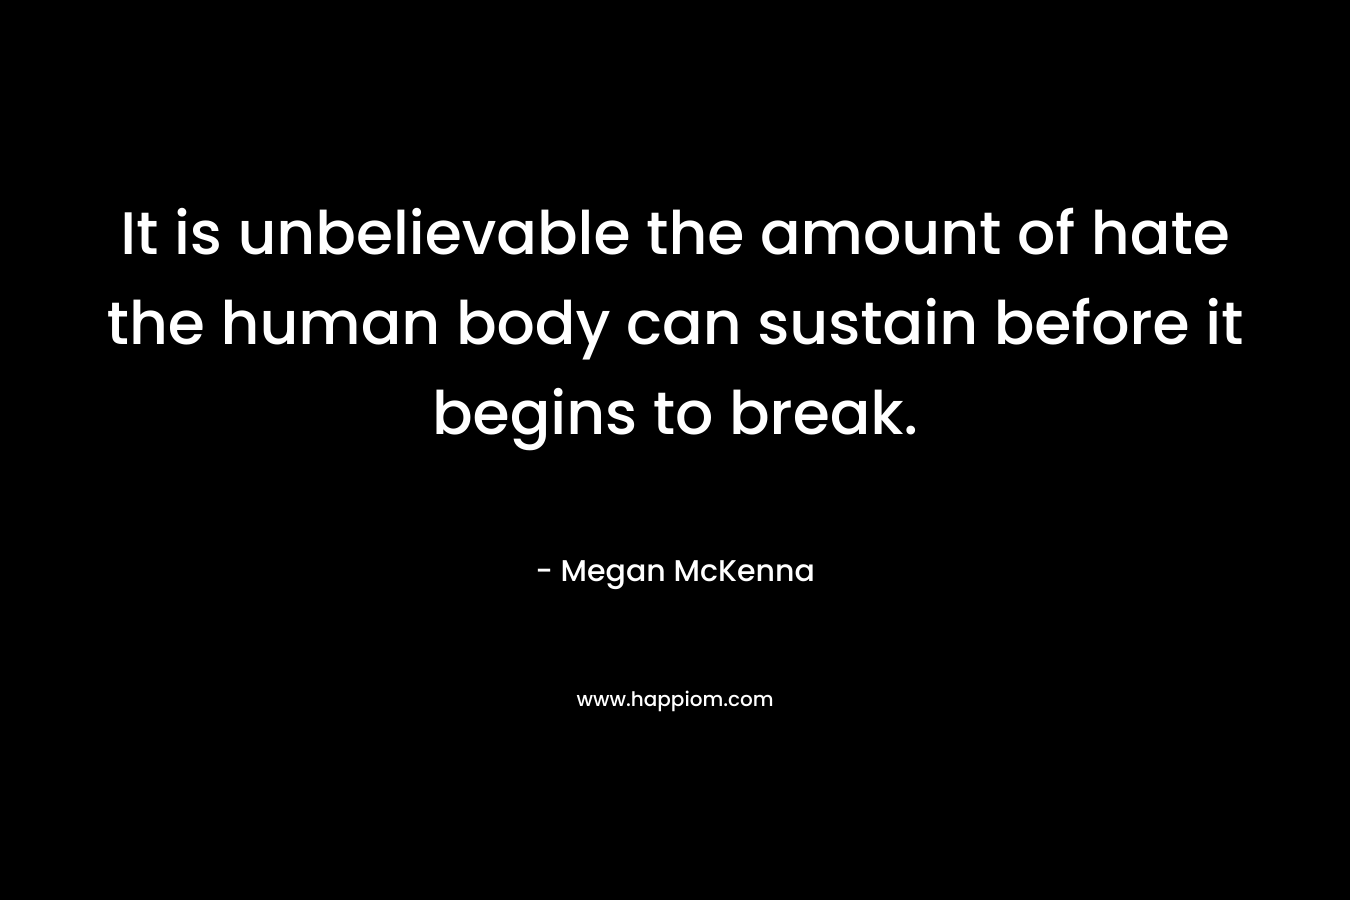 It is unbelievable the amount of hate the human body can sustain before it begins to break. – Megan McKenna